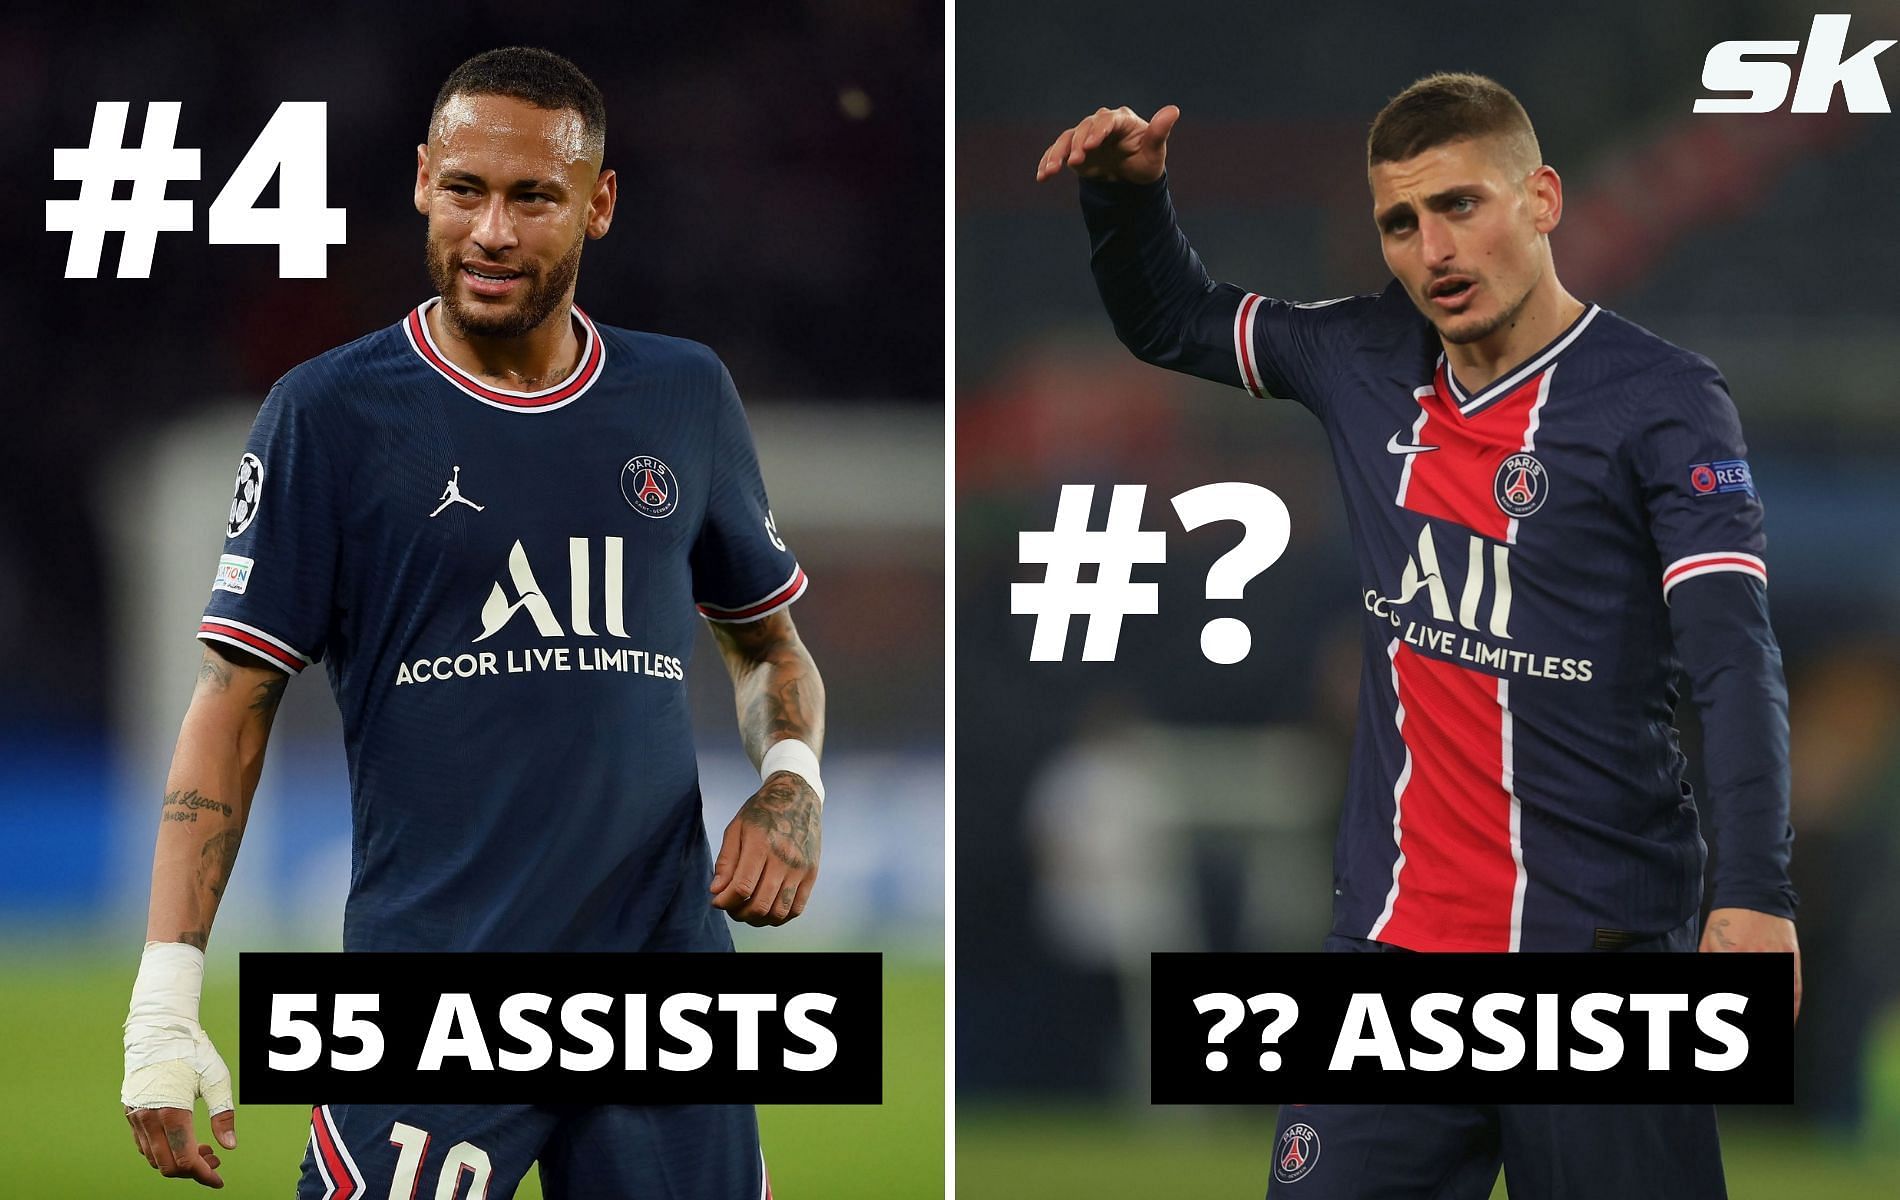 Who is the active PSG player with most assists for the club?